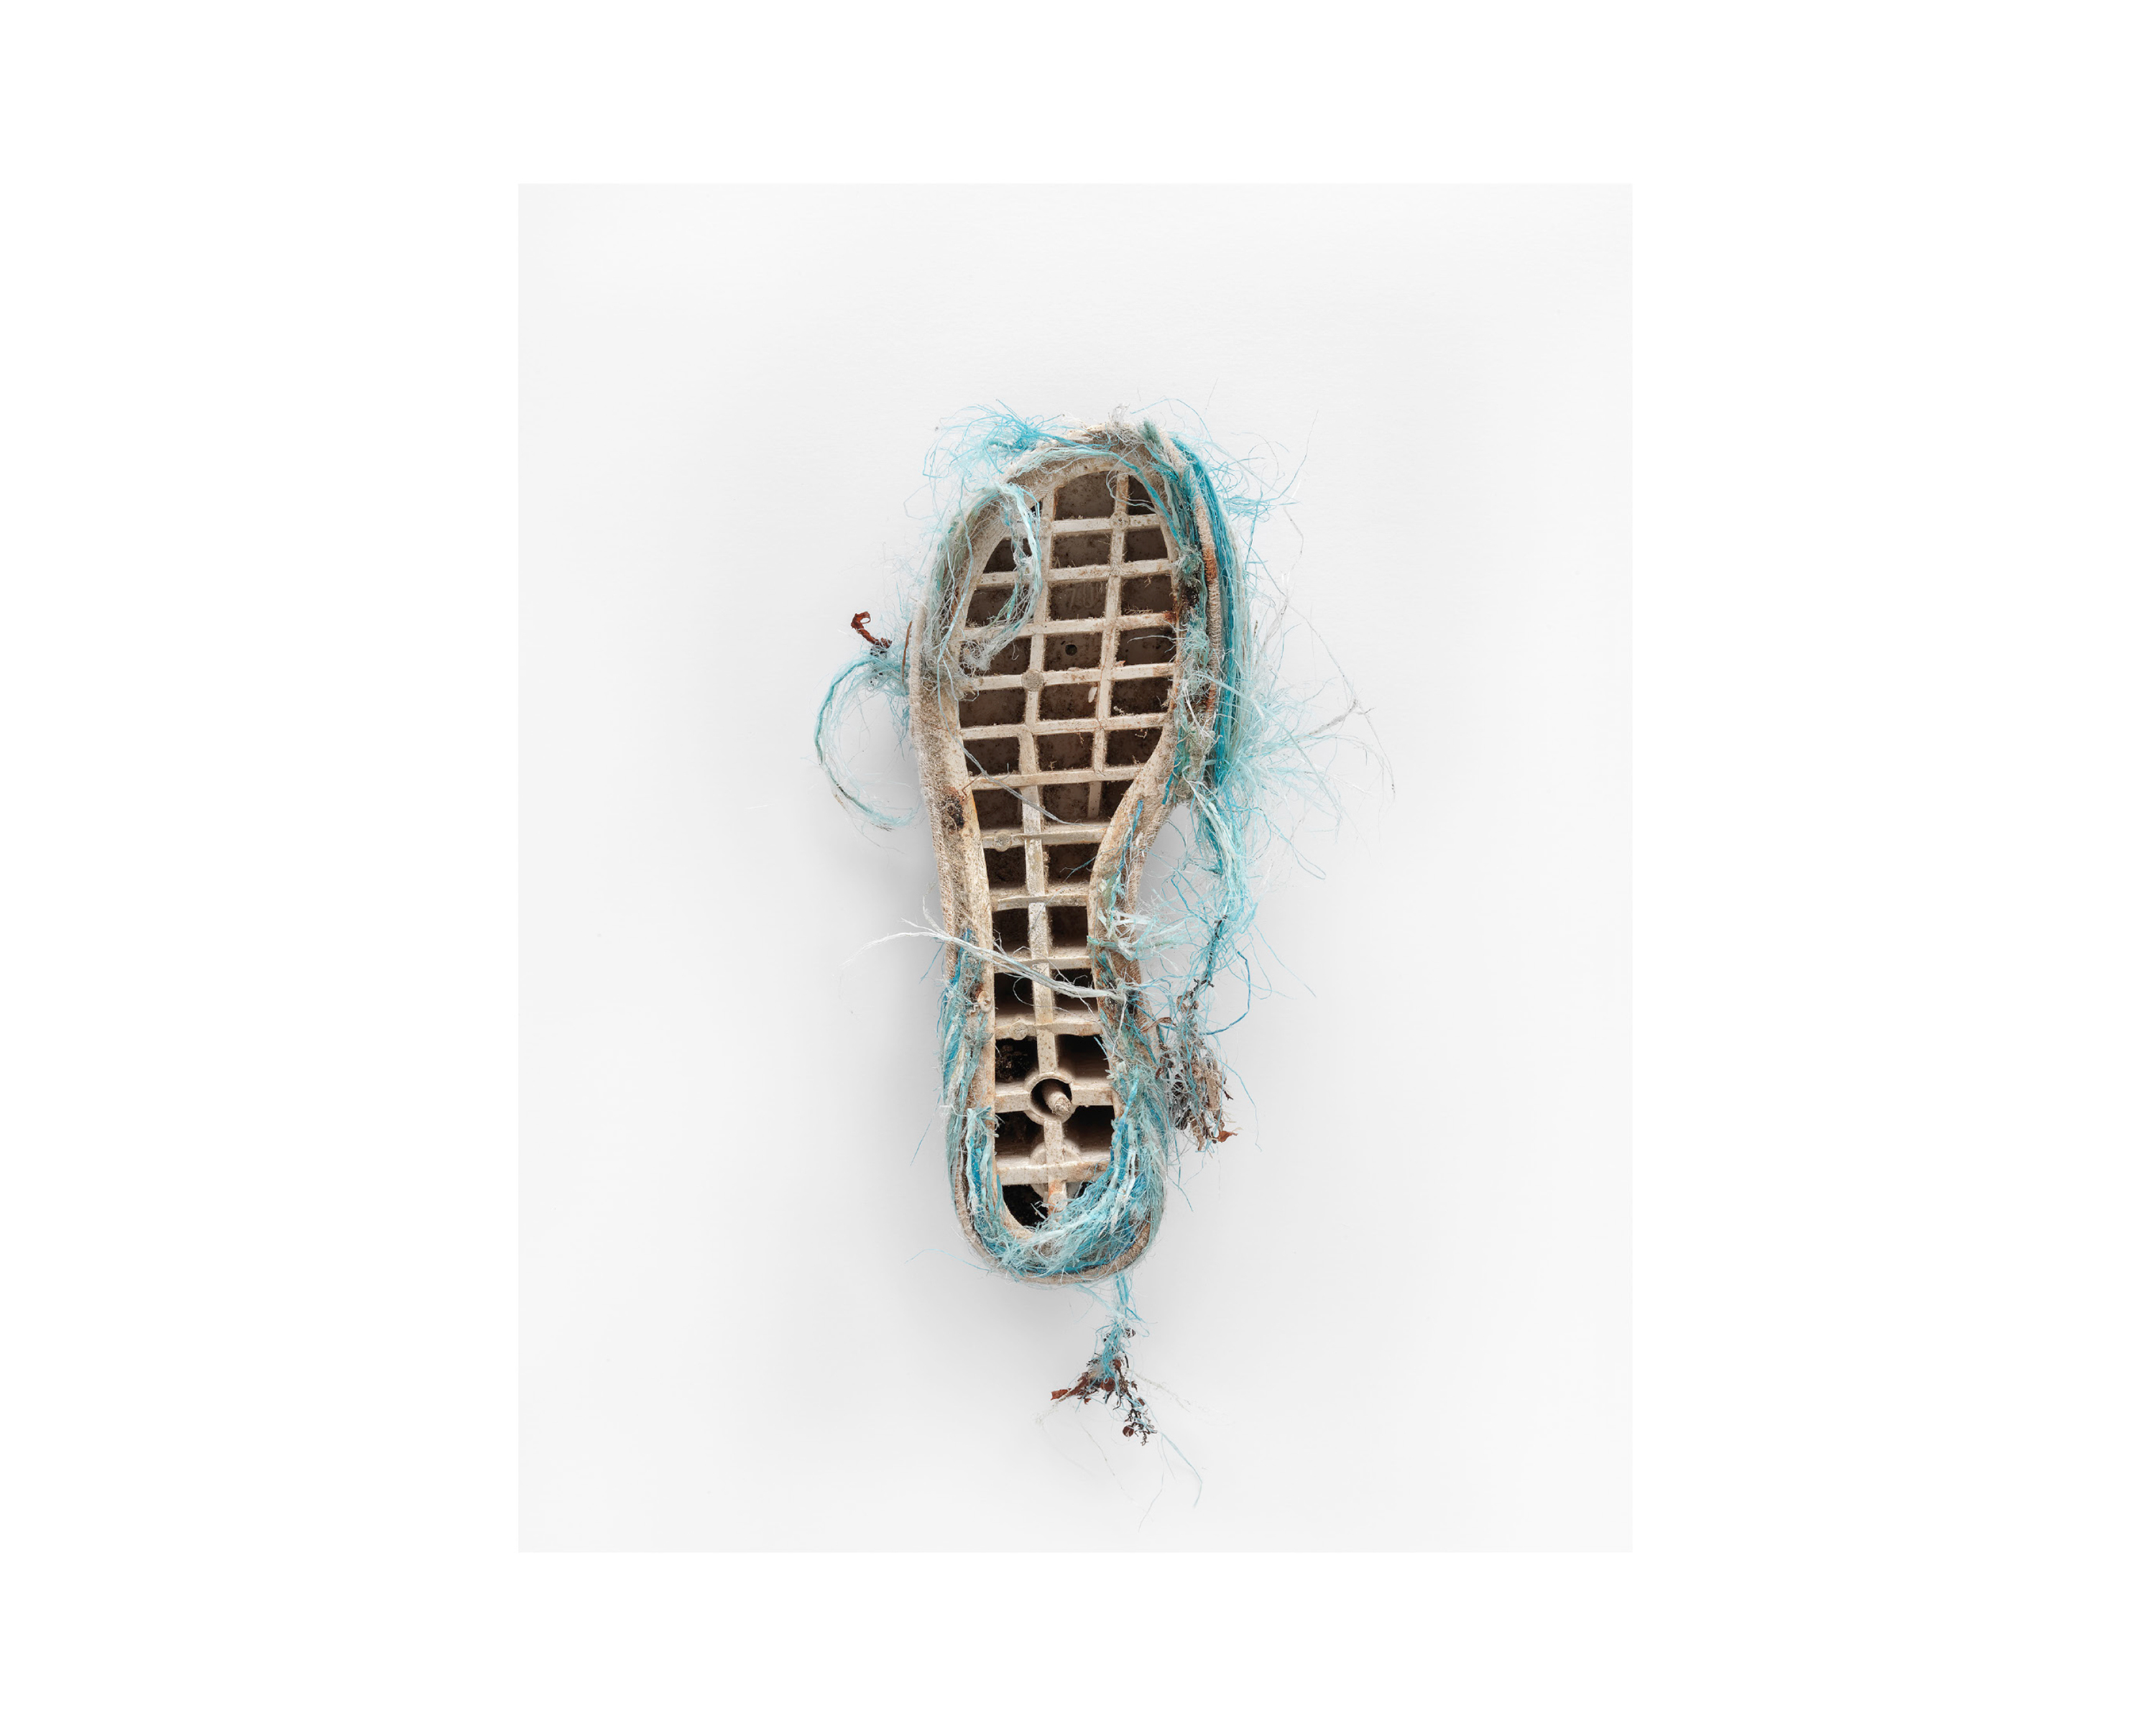 Photograph of a sole of a degraded platform shoe